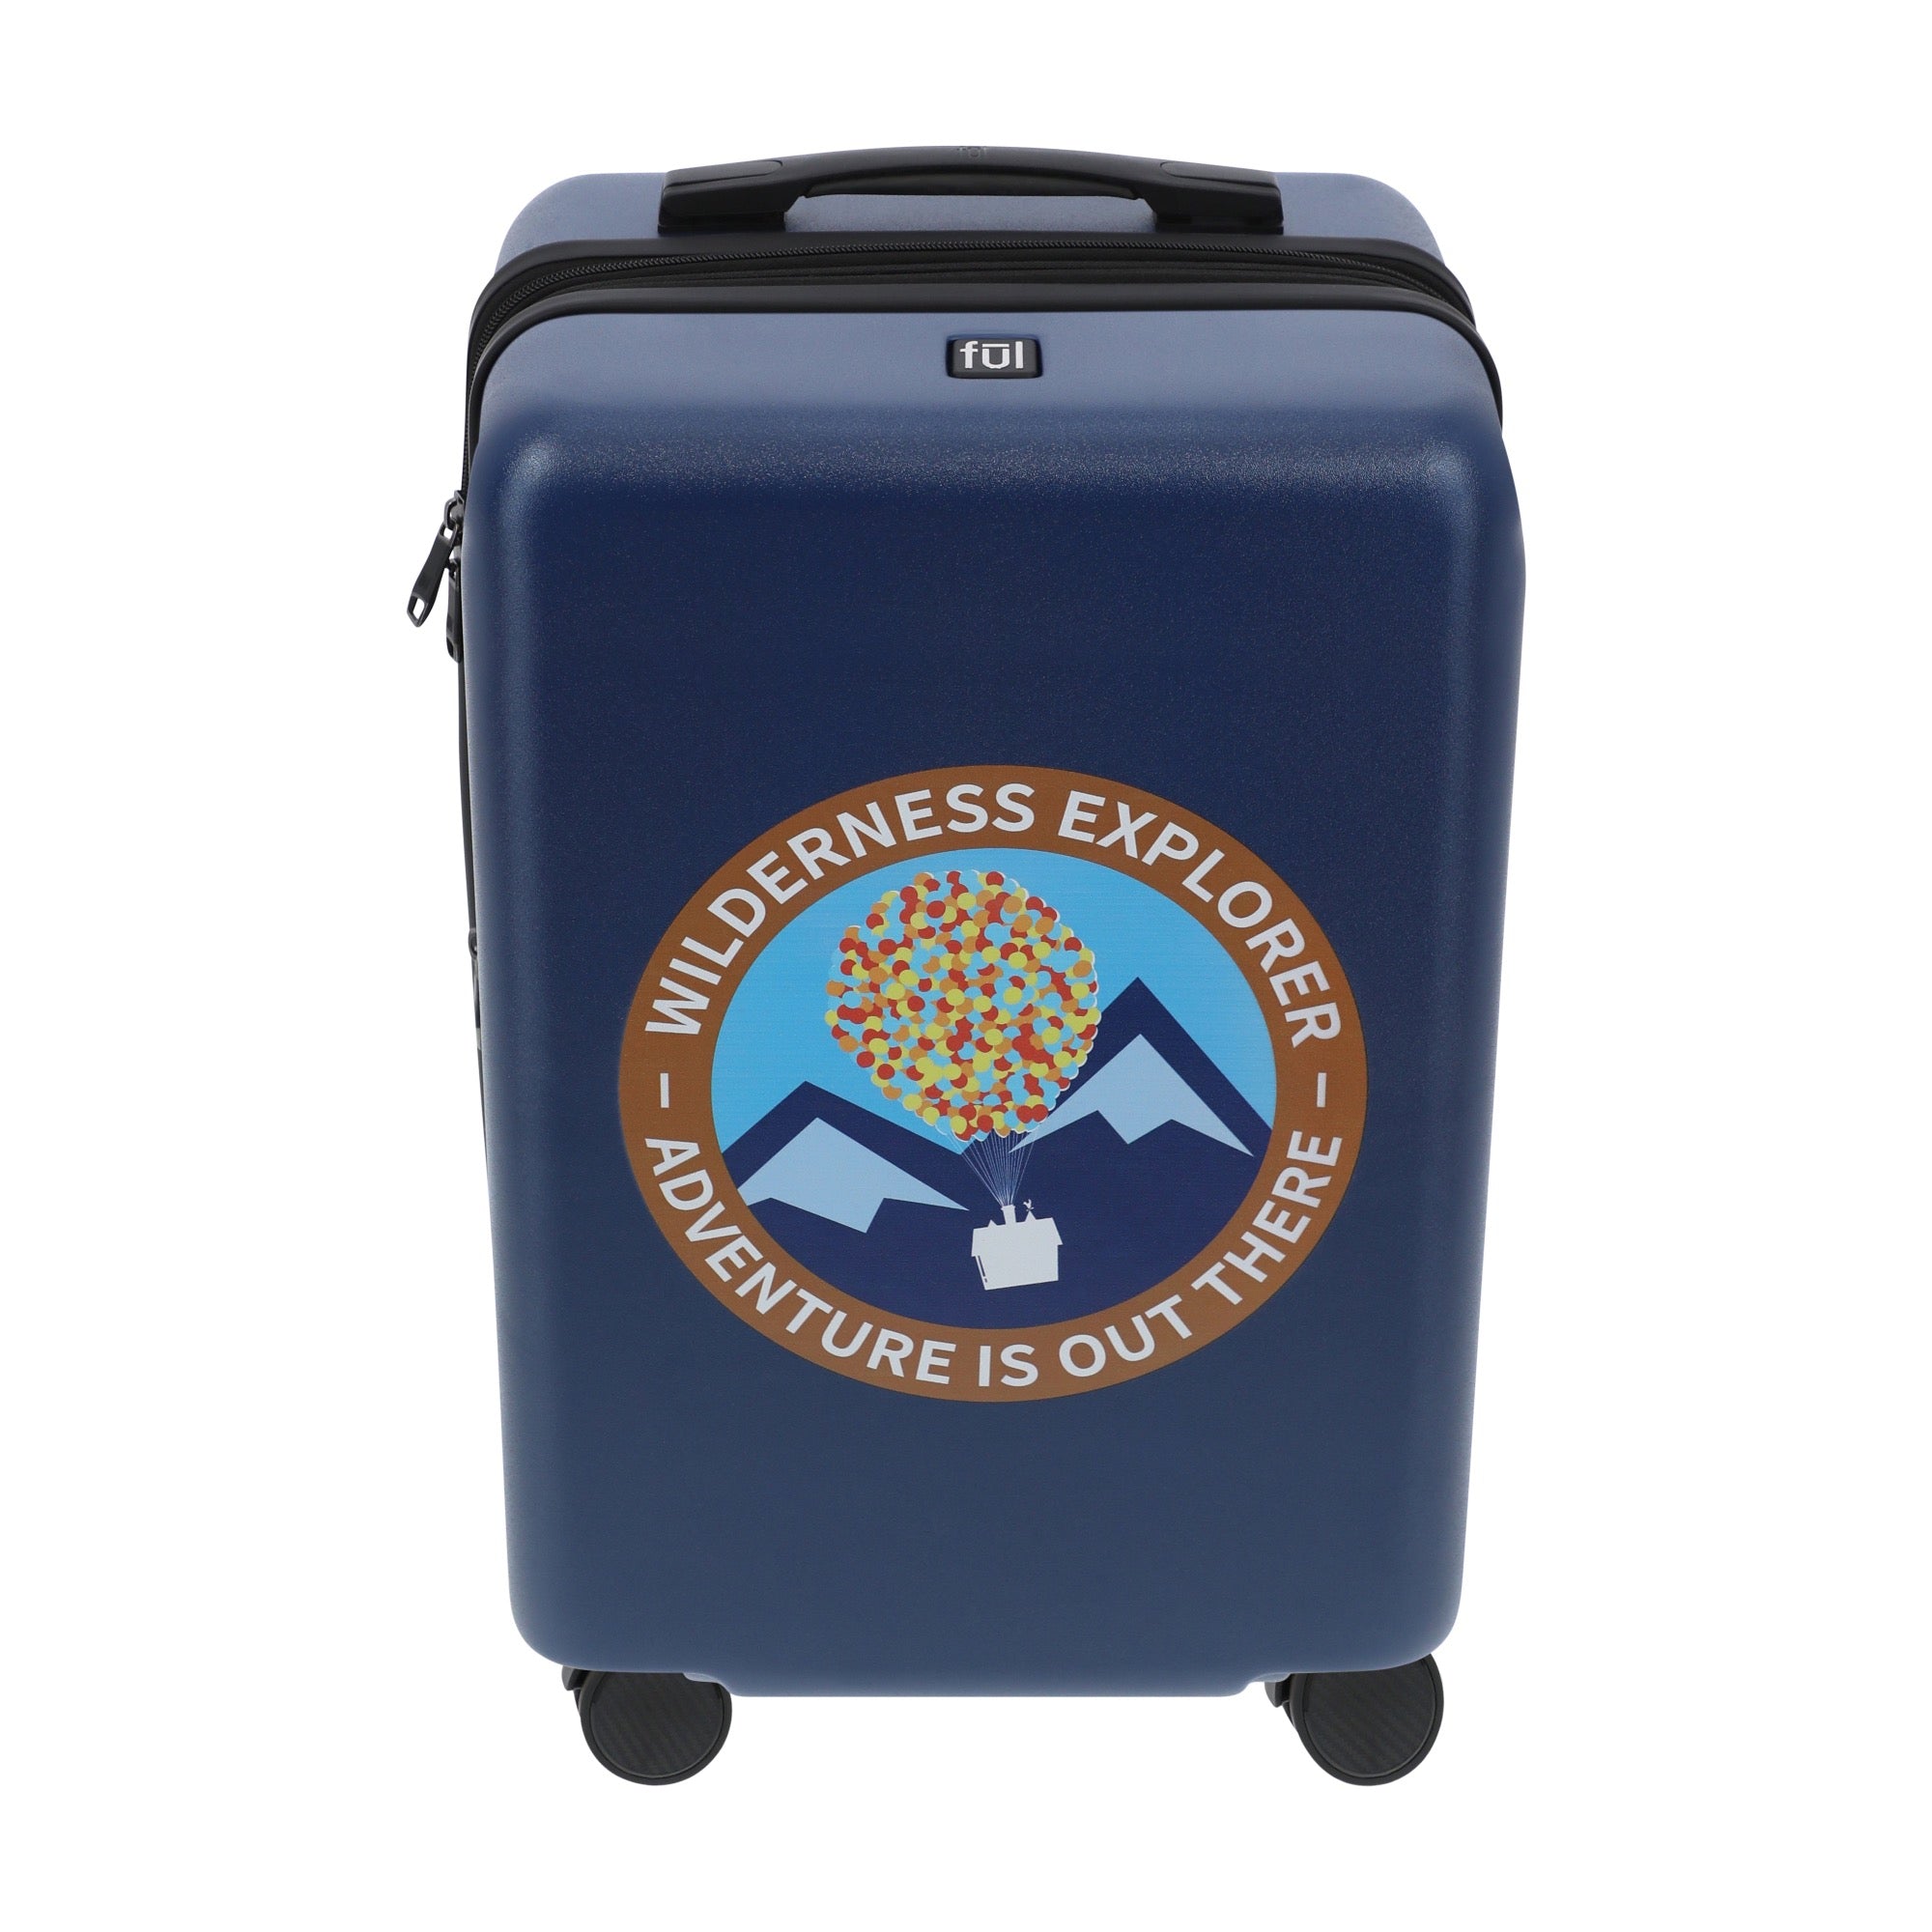 Navy blue disney up 22.5" carry-on spinner suitcase luggage by Ful